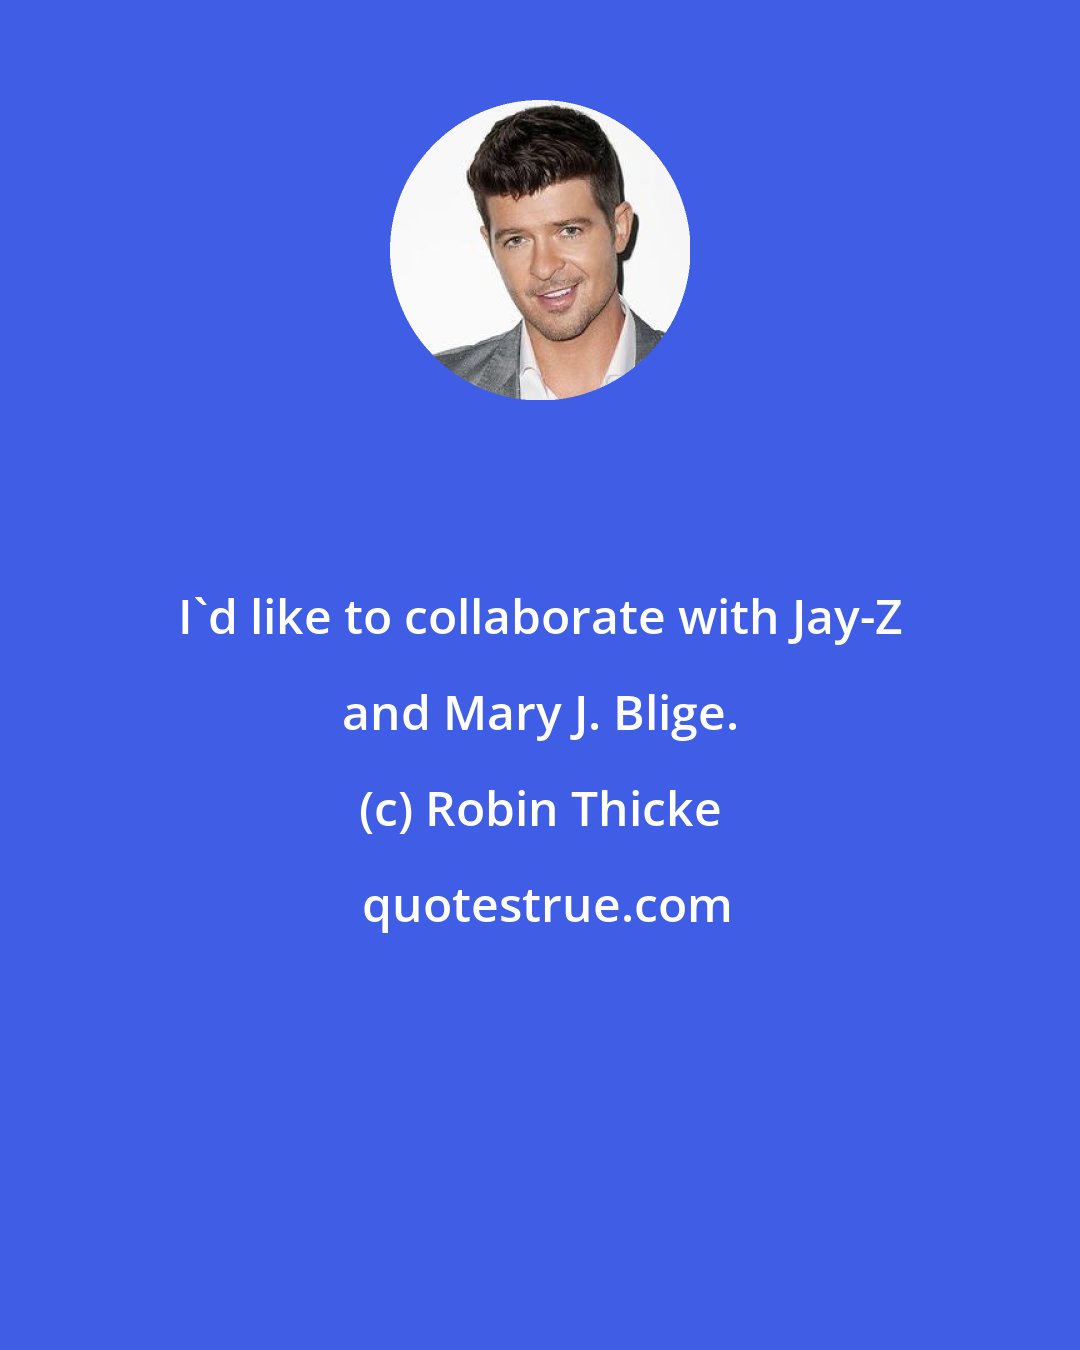 Robin Thicke: I'd like to collaborate with Jay-Z and Mary J. Blige.